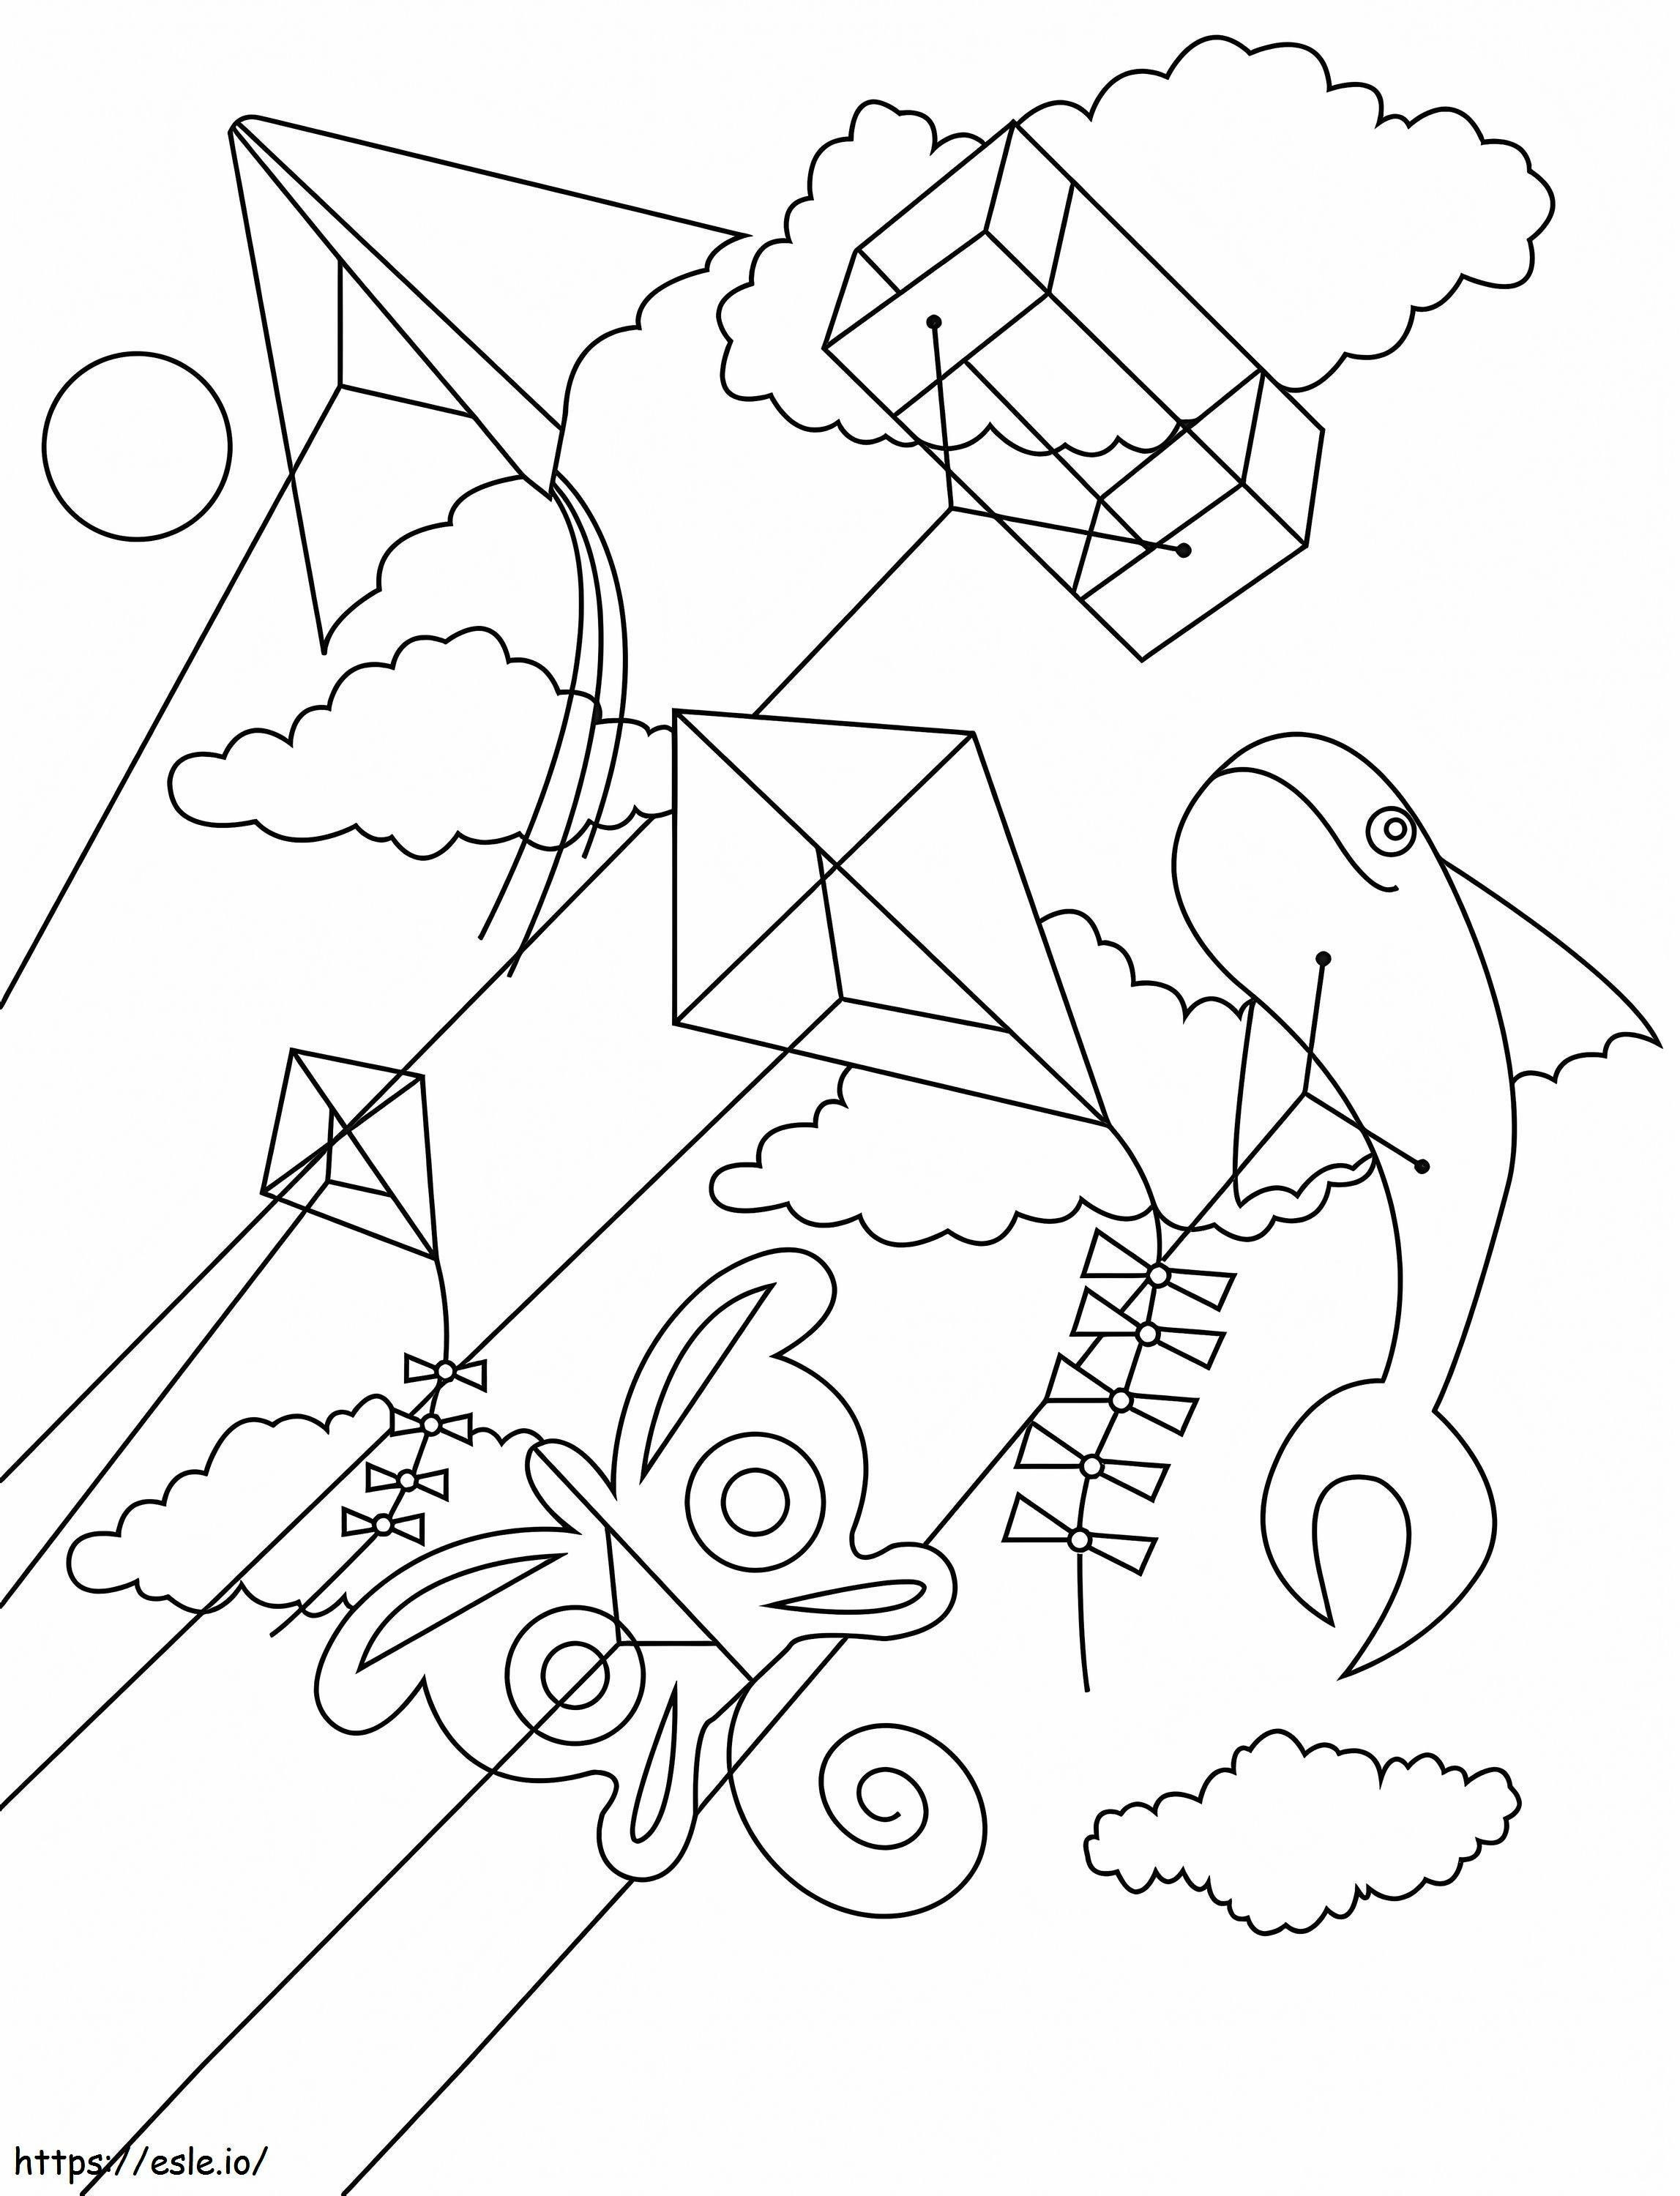 Kite Festival coloring page